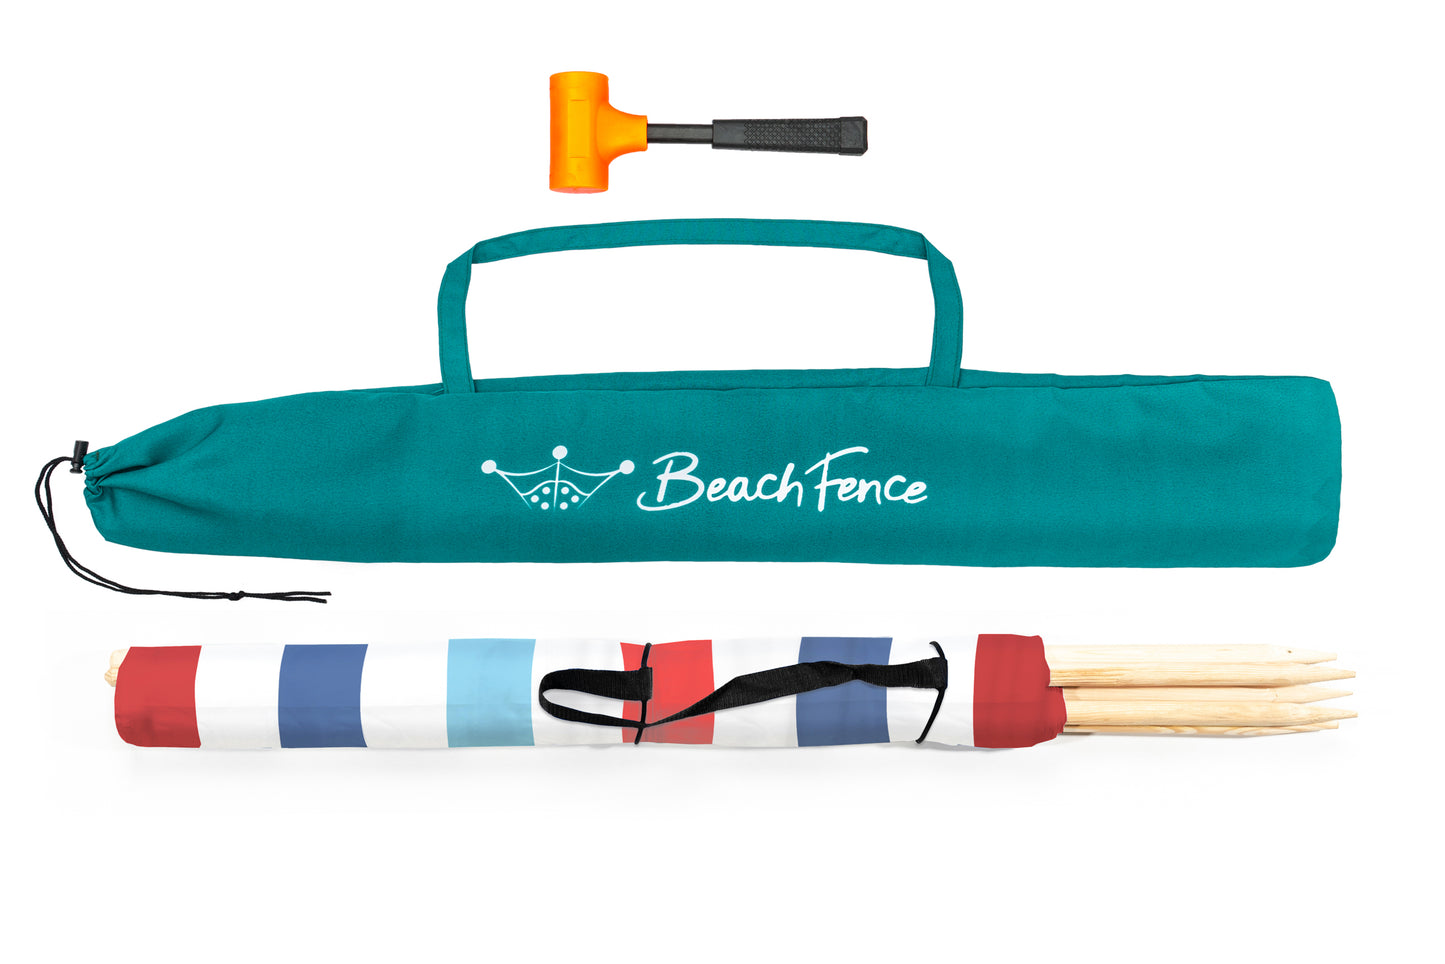 BEACH FENCE 20 ft Premium Beach Windscreen, Privacy Screen, Wind Blocker - Royal Red, Free Rubber Mallet and Carry Bag Included